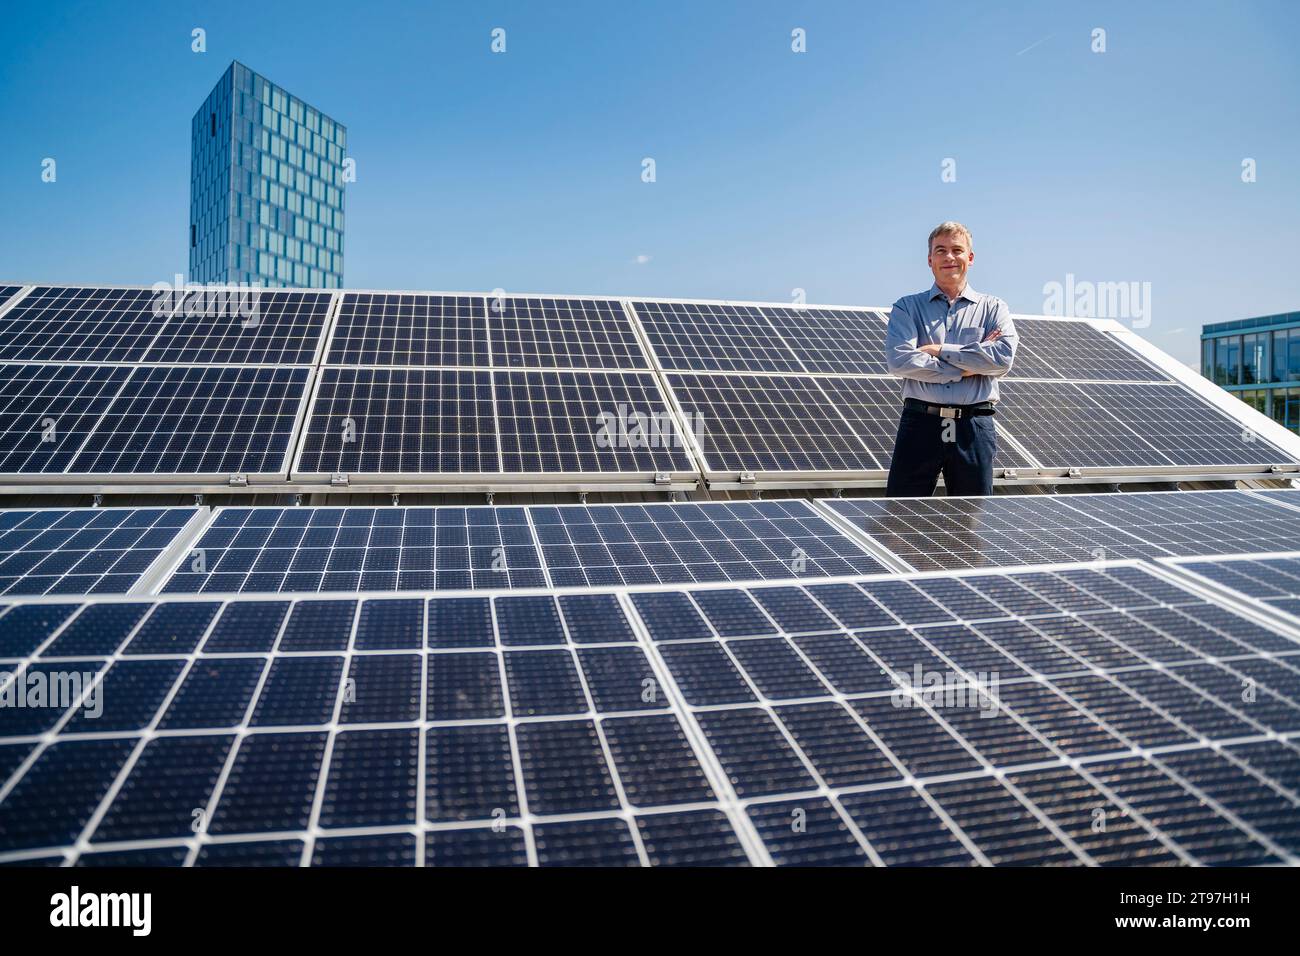 A self-assured male entrepreneur standing proudly in the midst of a field of solar panels Stock Photo